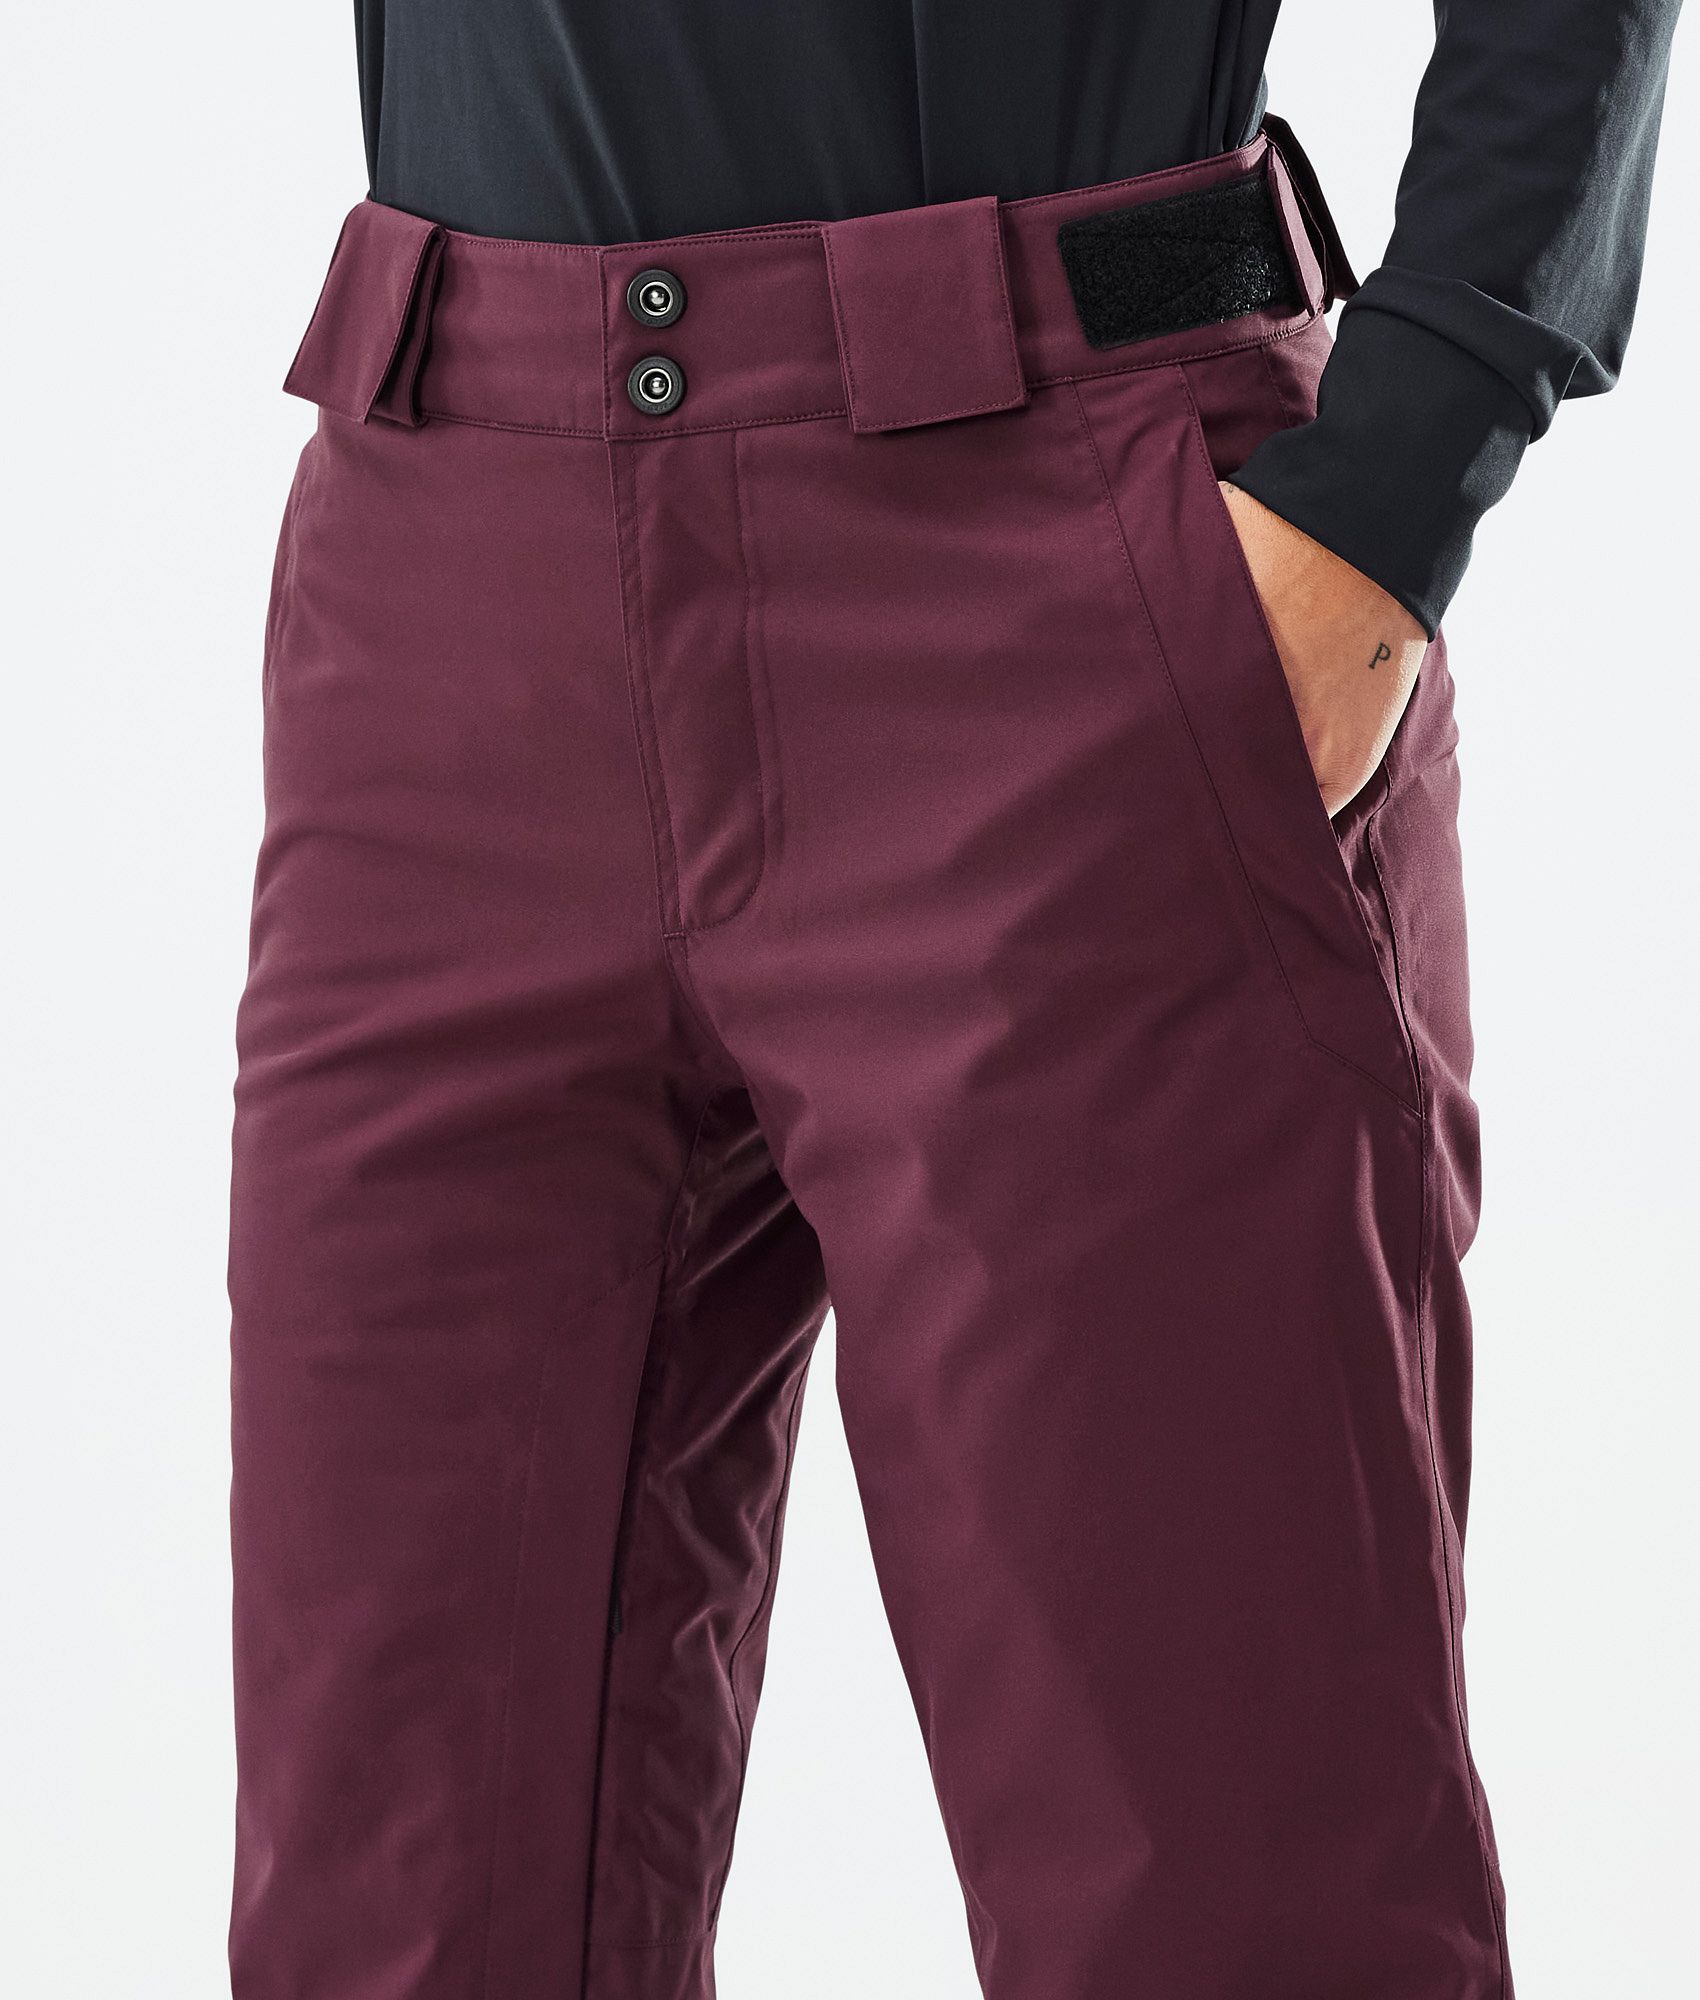 Women's Hoxton Wide Leg Trousers from Crew Clothing Company